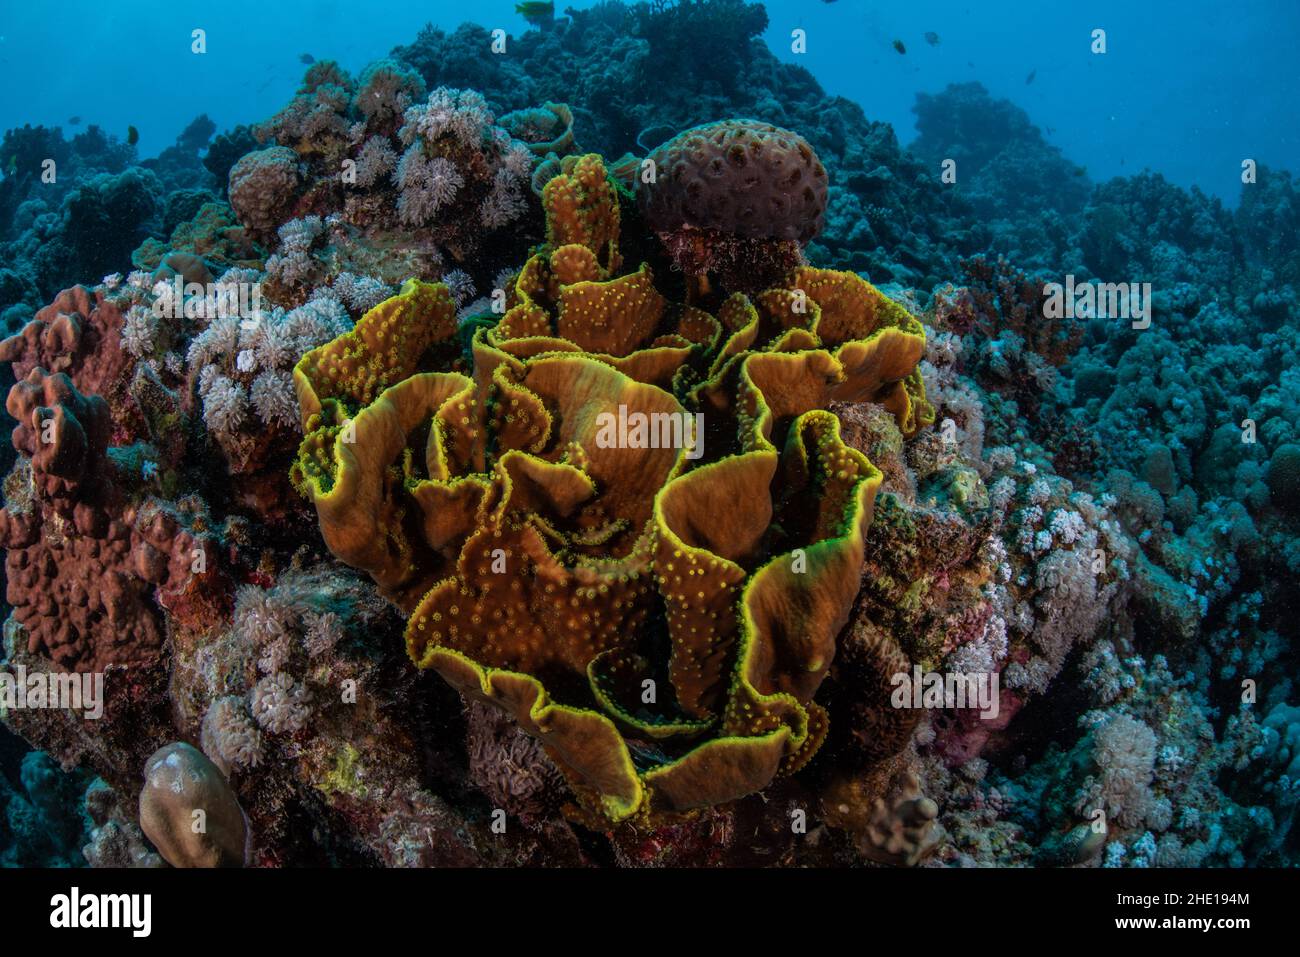 A vibrant yellow disc coral (Turbinaria mesenterina) on a reef in the red sea, Egypt. Stock Photo